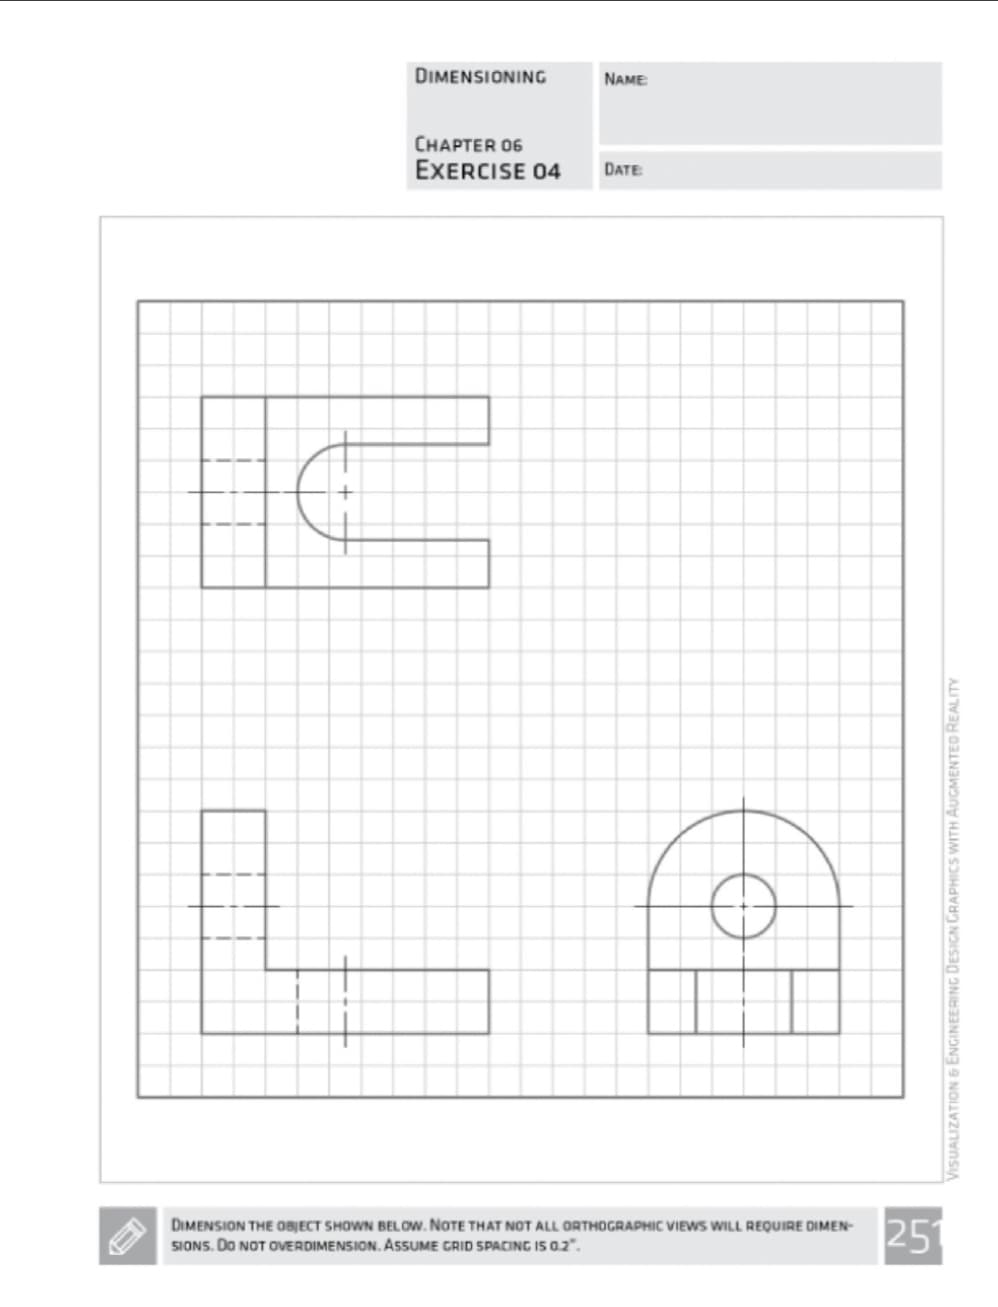 €
DIMENSIONING
NAME:
CHAPTER 06
EXERCISE 04 DATE
DIMENSION THE OBJECT SHOWN BELOW. NOTE THAT NOT ALL ORTHOGRAPHIC VIEWS WILL REQUIRE DIMEN-
SIONS. DO NOT OVERDIMENSION. ASSUME GRID SPACING IS 0.2.
VISUALIZATION & ENGINEERING DESIGN GRAPHICS WITH AUGMENTED REALITY
251